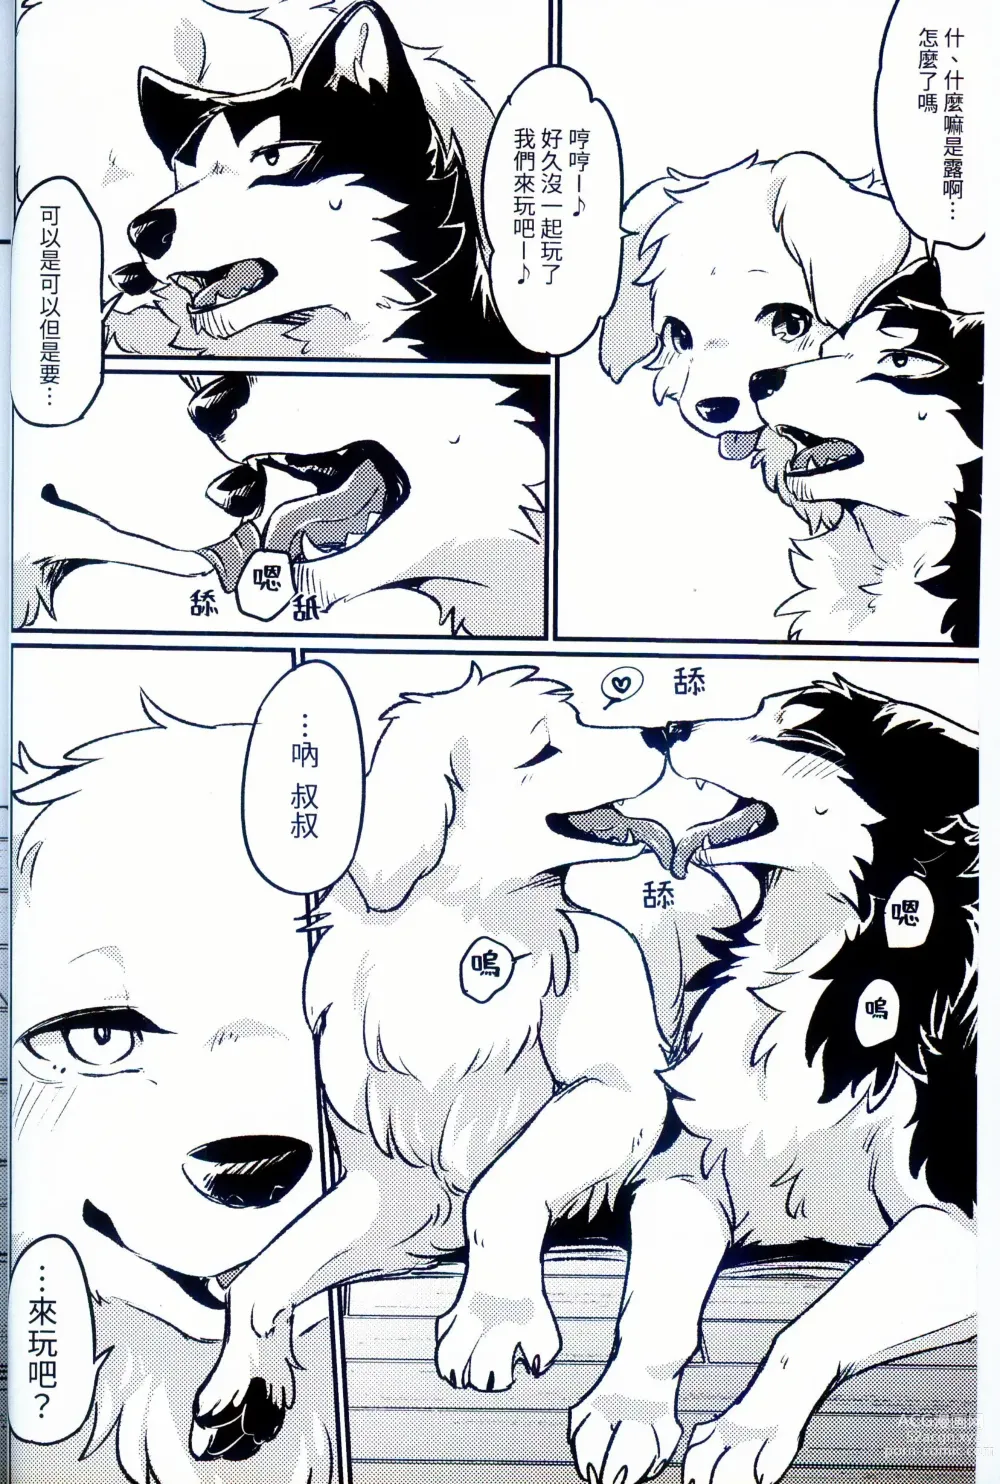 Page 3 of doujinshi More,more,MORE! (decensored)